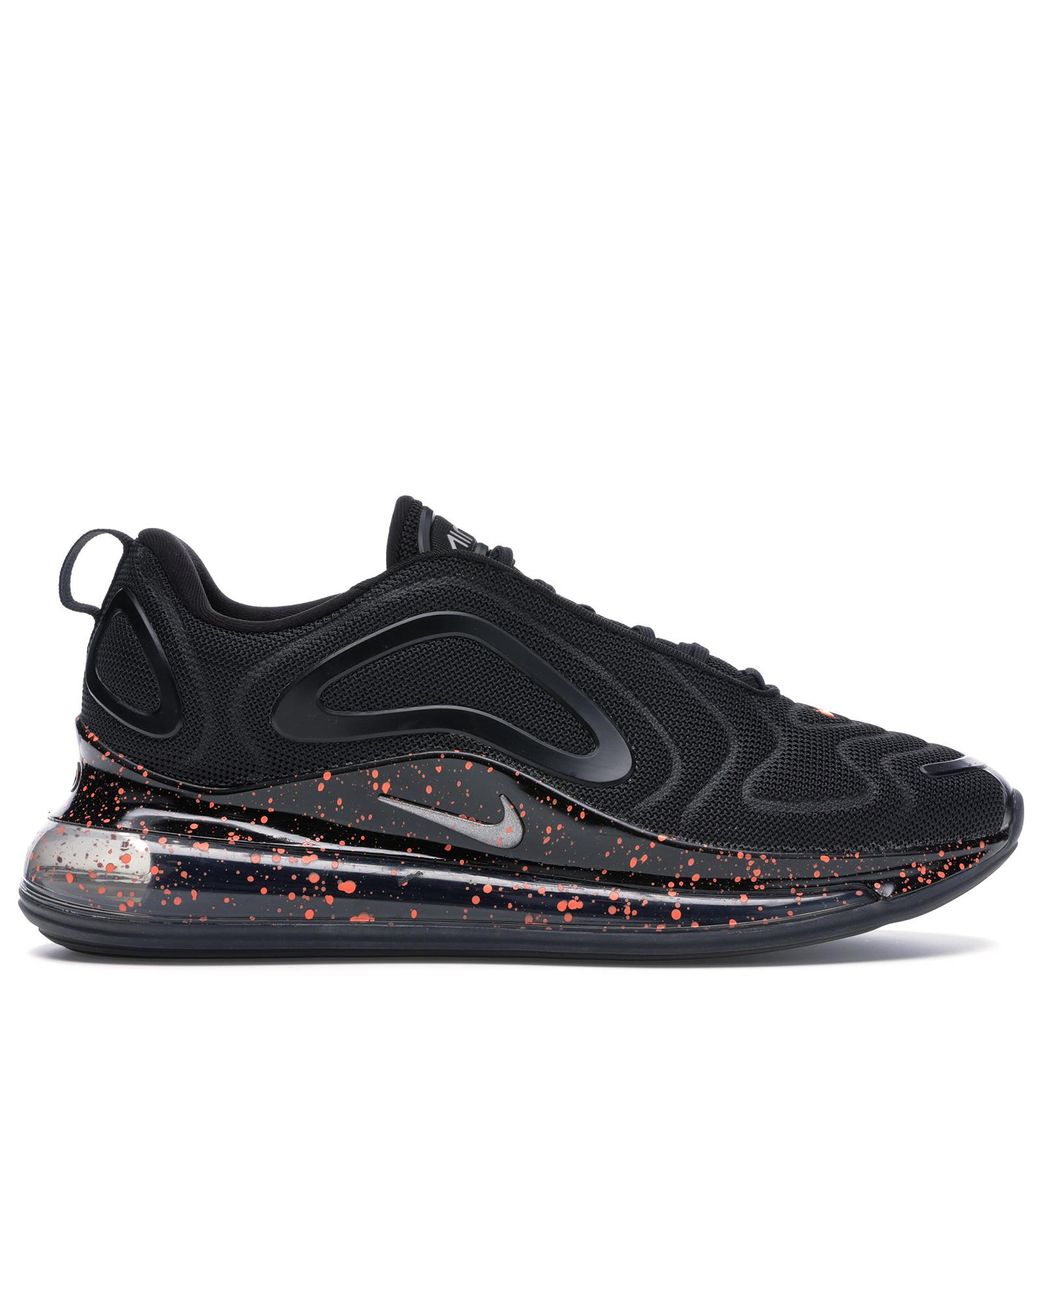 Nike Air Max 720 Hot Lava in Black for 